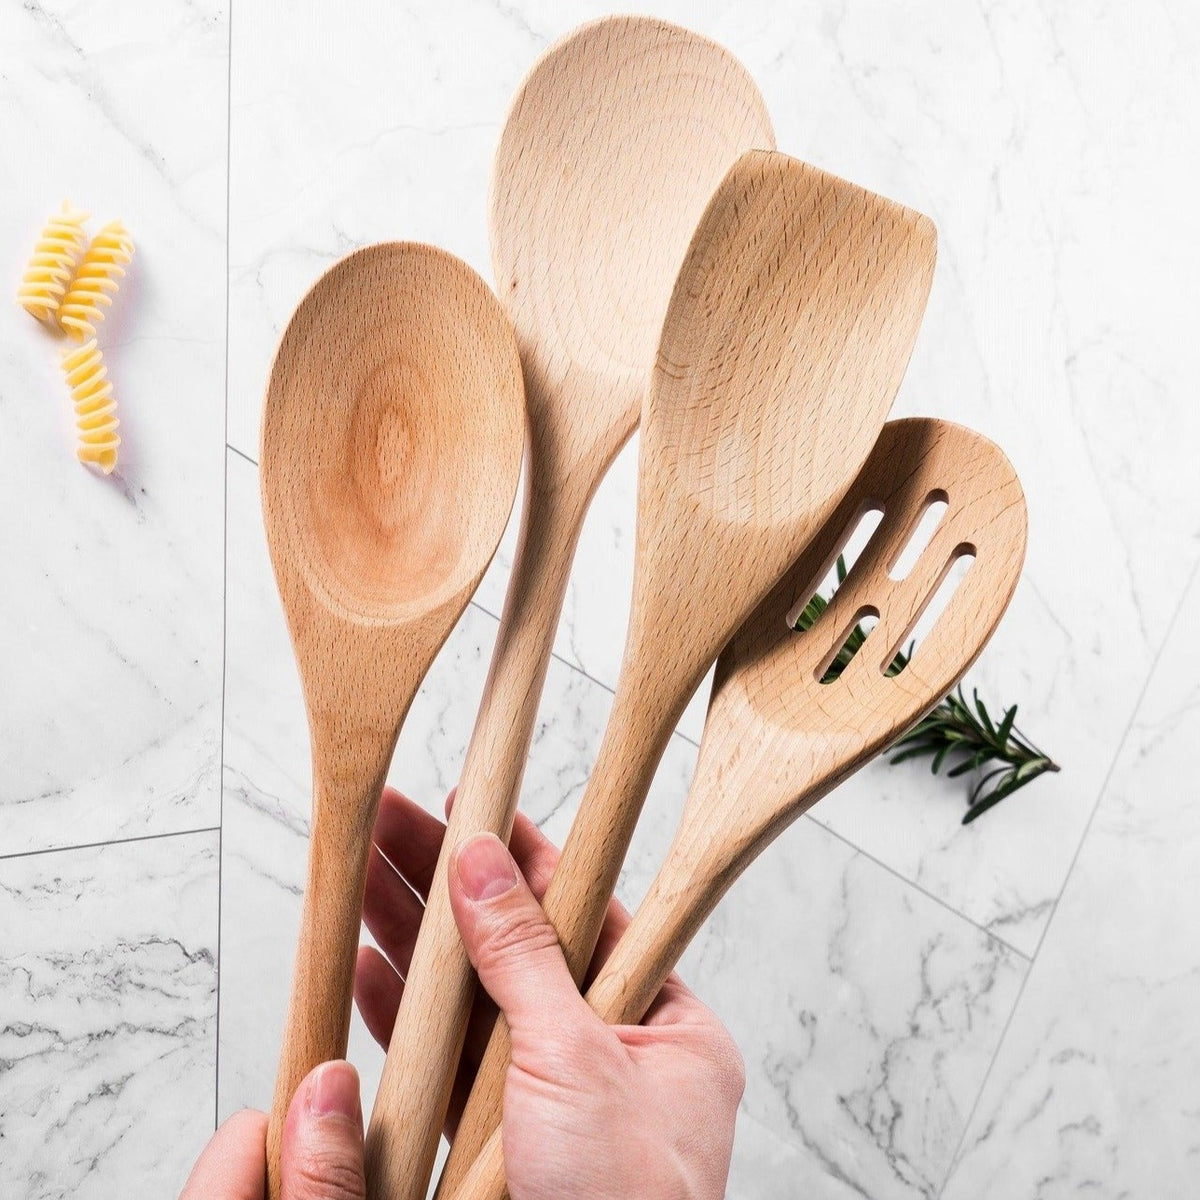 LAYBROY Wooden Spoons For Cooking, Wooden spatulas, Nonstick